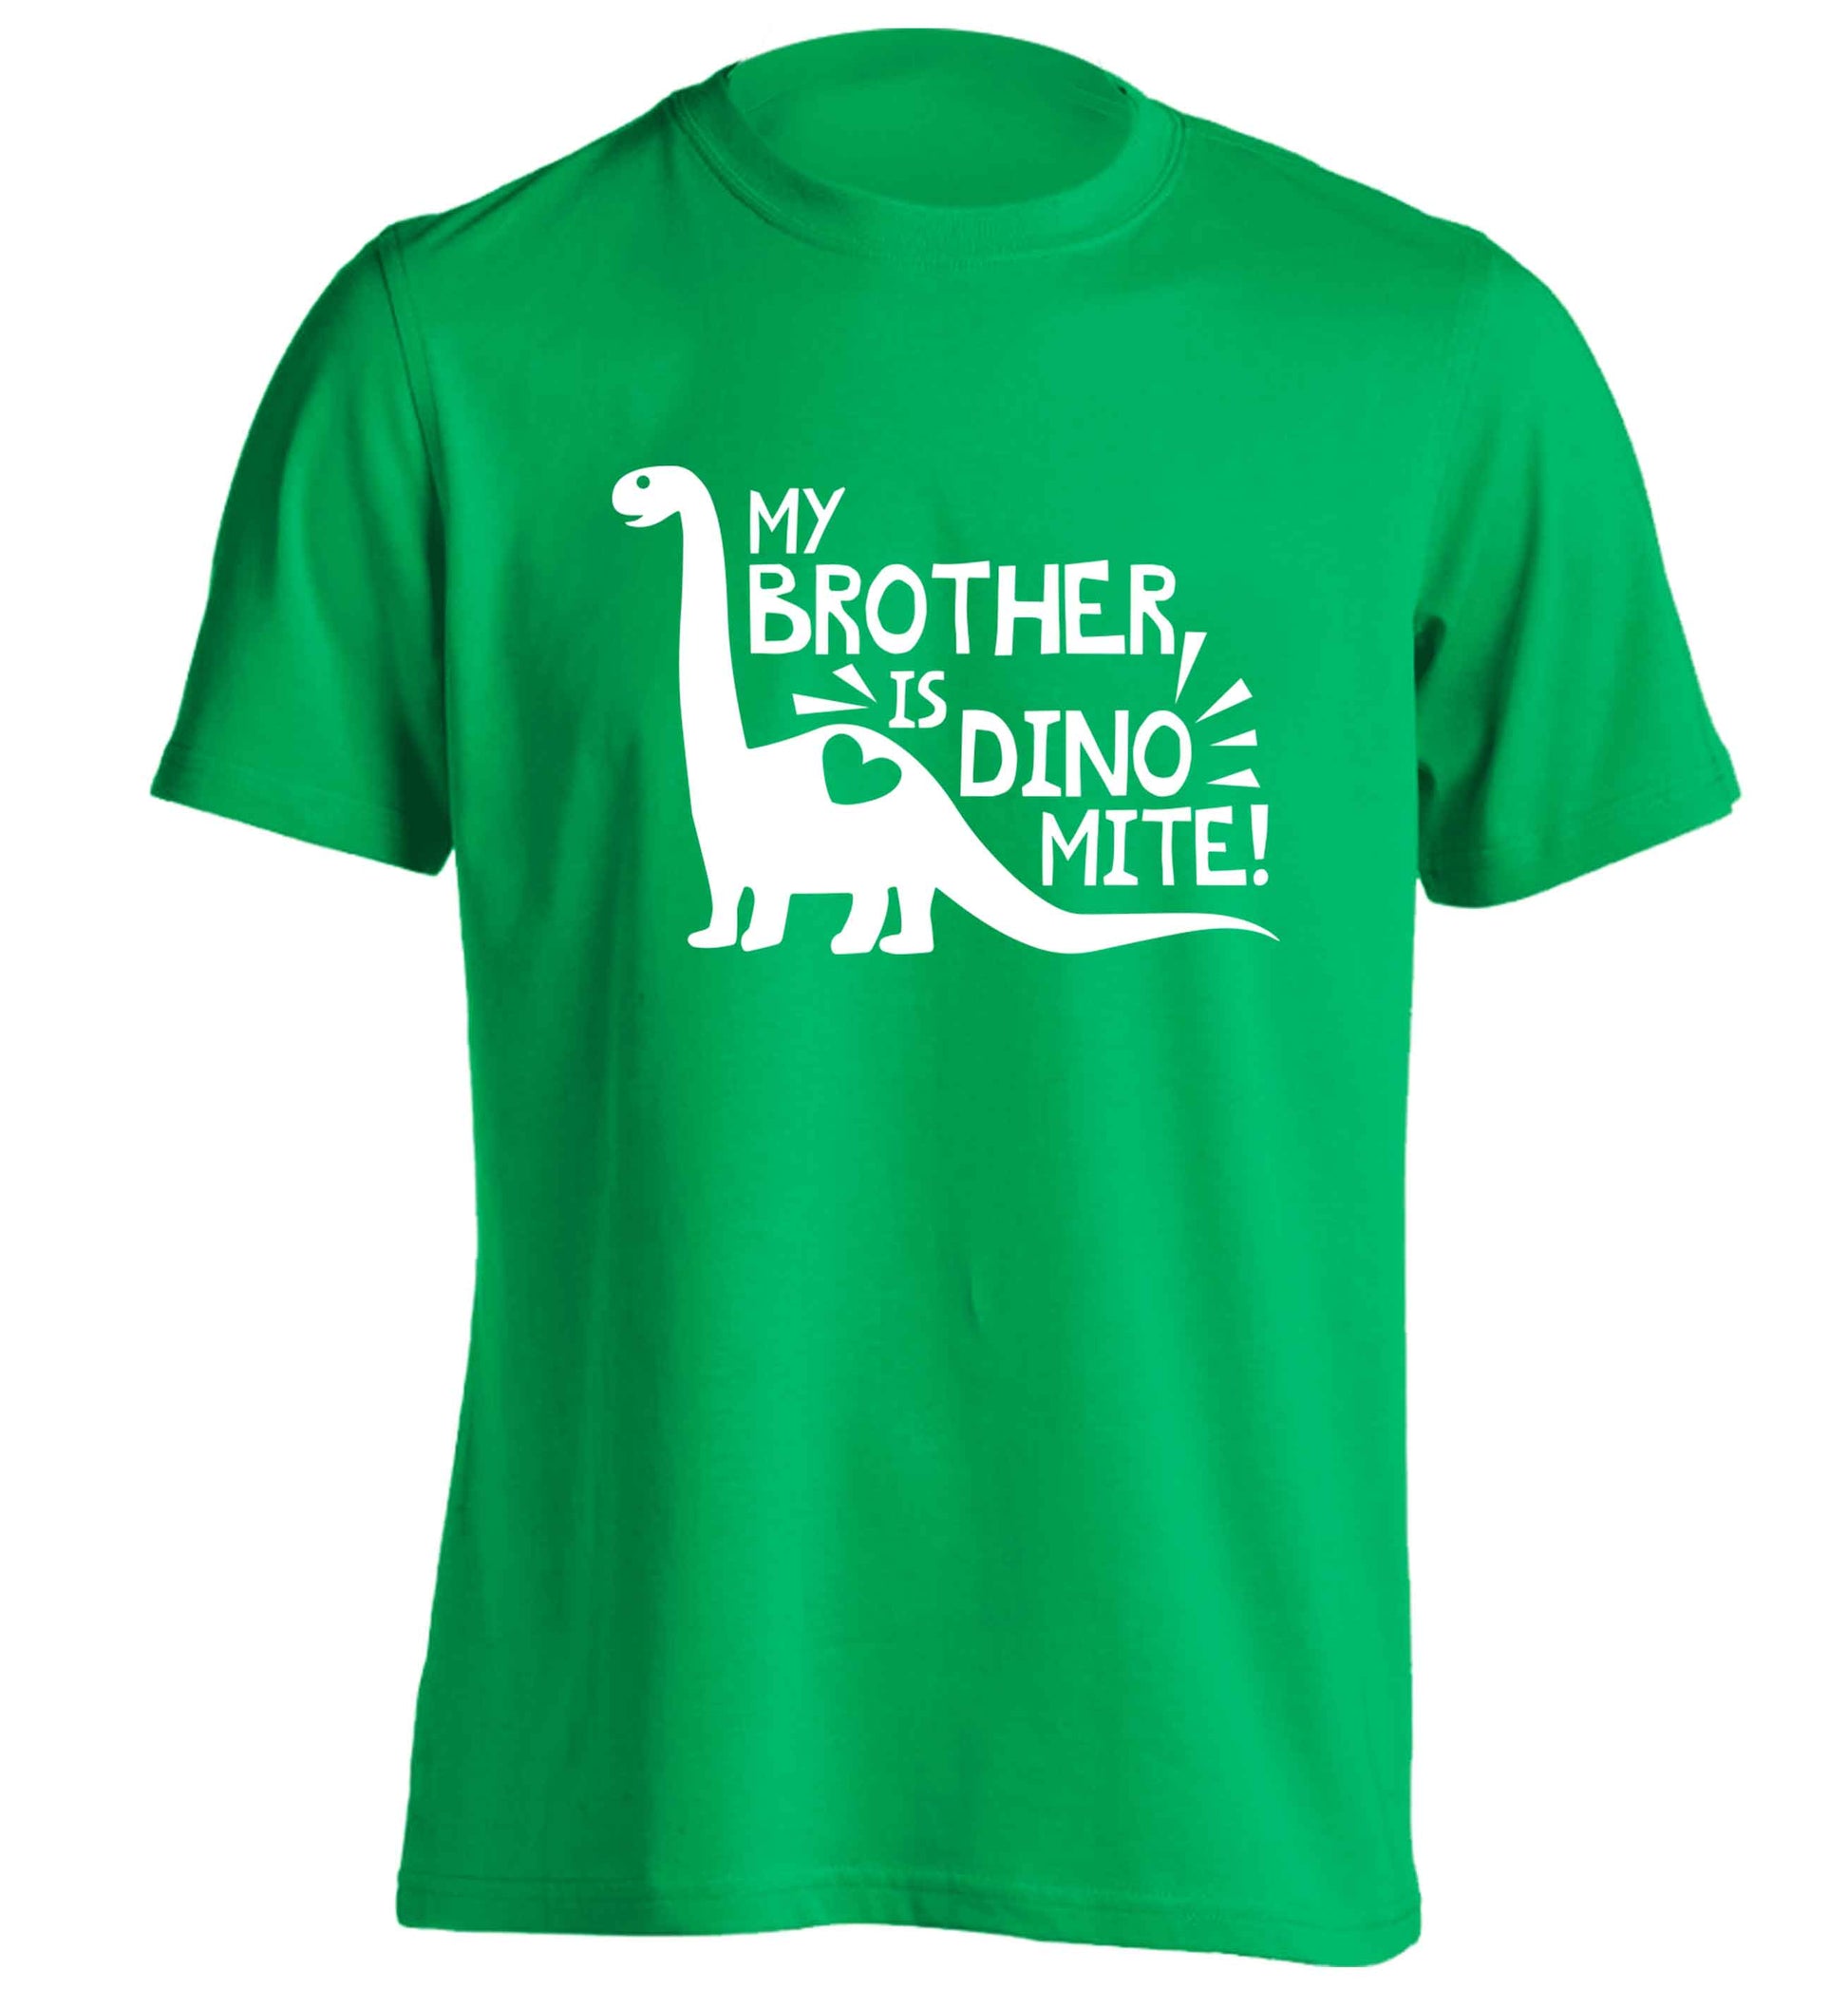 My brother is dinomite! adults unisex green Tshirt 2XL